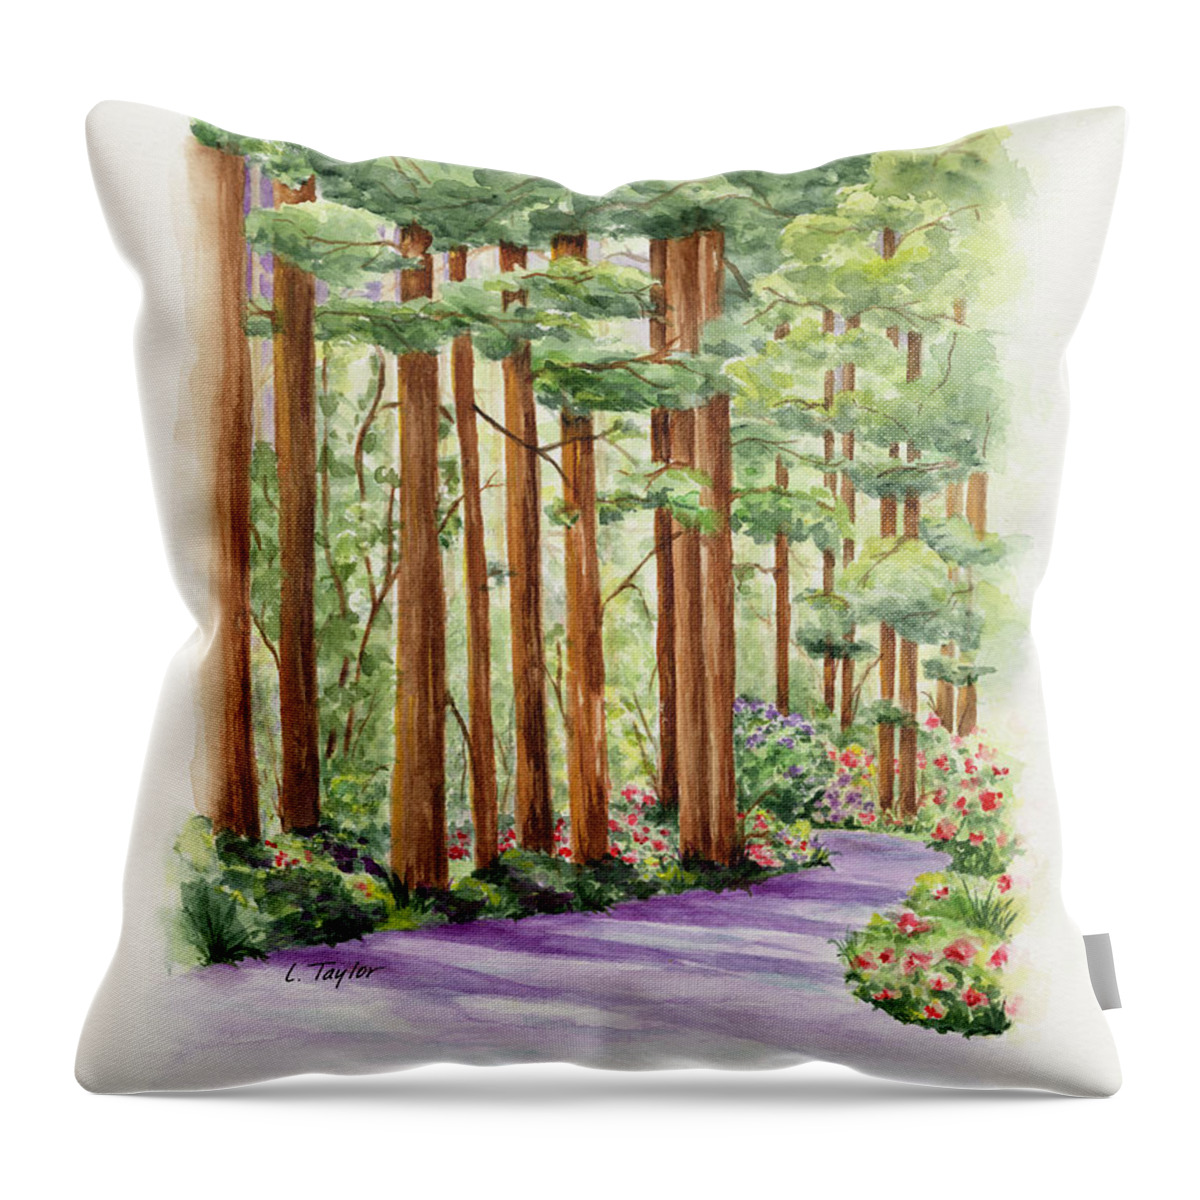 Forest Throw Pillow featuring the painting Standing Tall by Lori Taylor